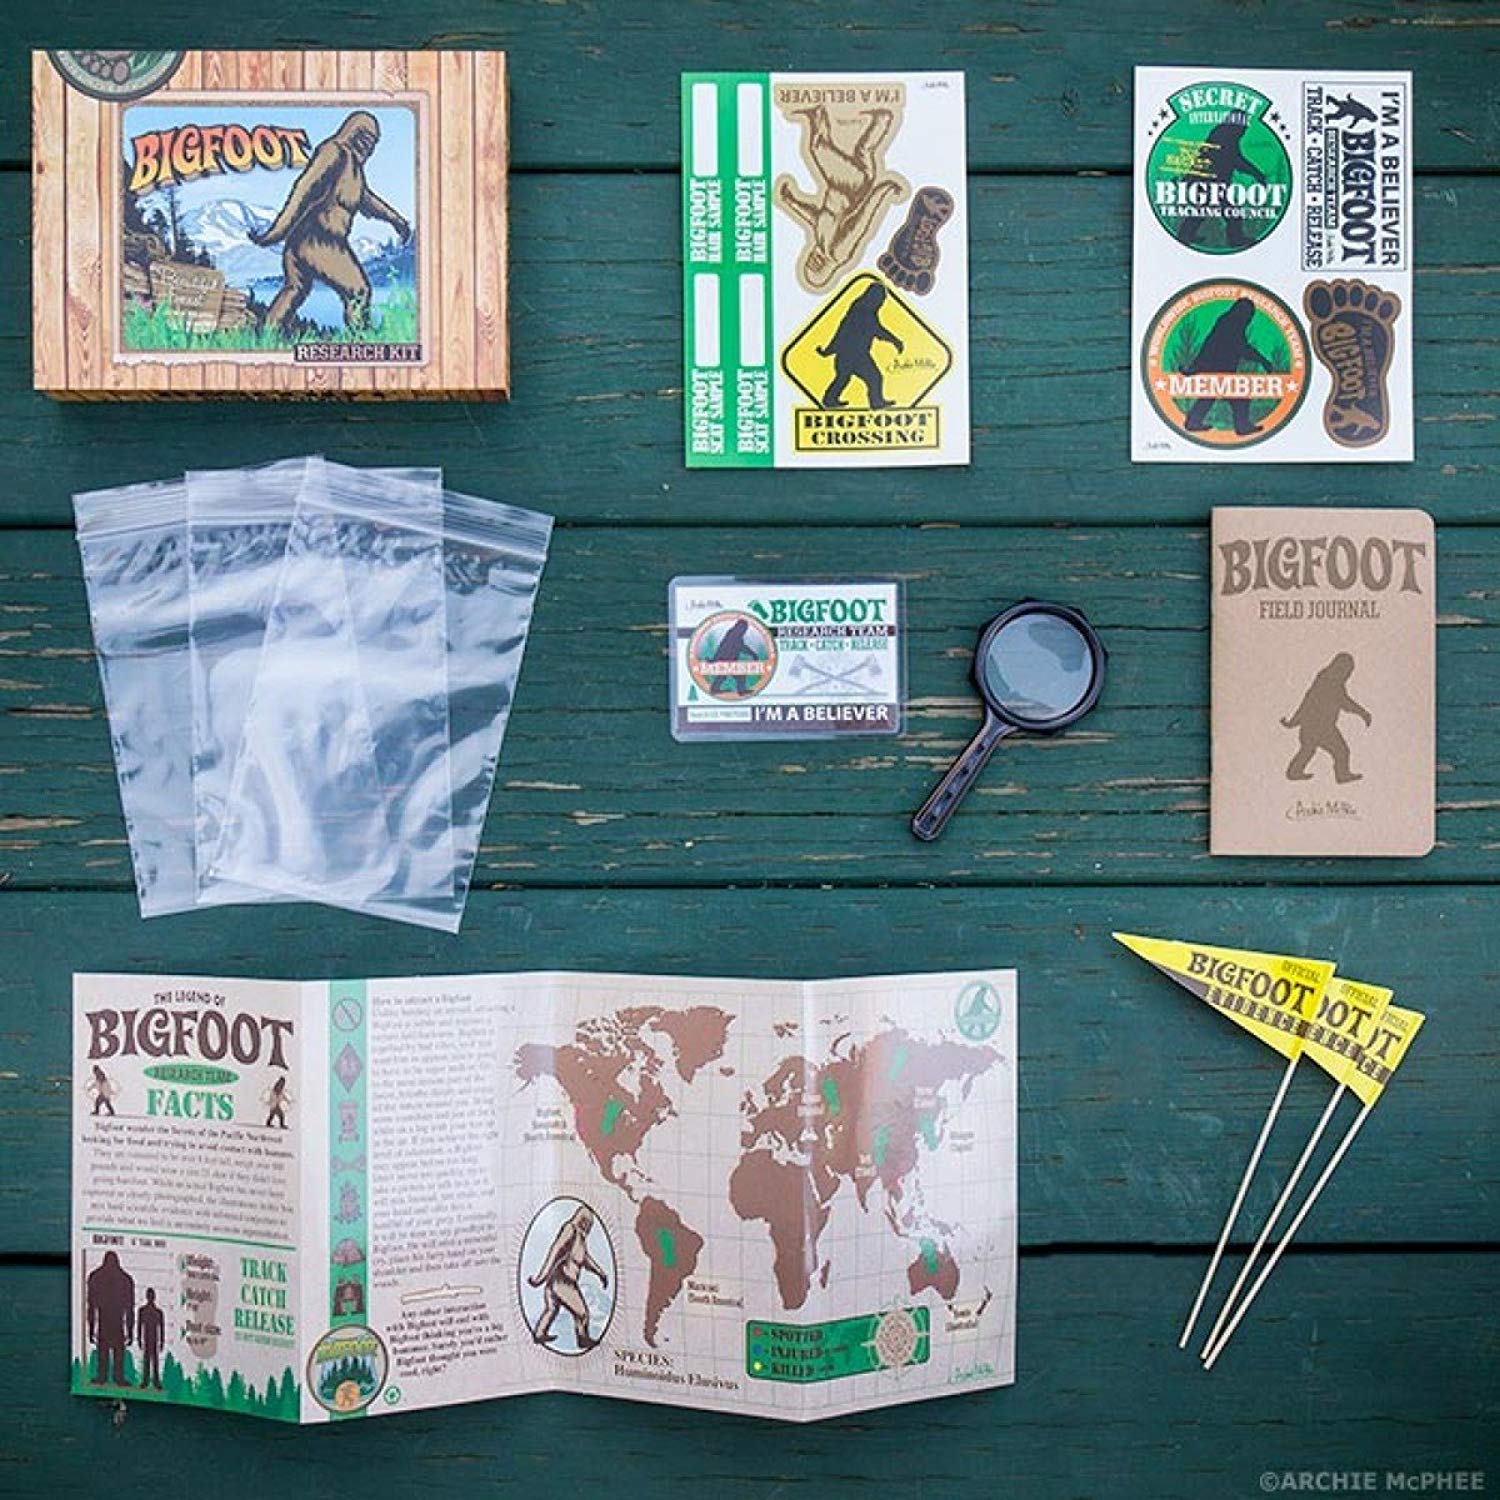  Amazon.com calls this bigfoot tracking kit a "gag gift" and "funny." <br><br>Those mofos won't be laughing after you capture a Sasquatch all by yourself using the kit available <a href="https://amzn.to/2n7h6Ol" "nofollow" target="_blank">here.</a>